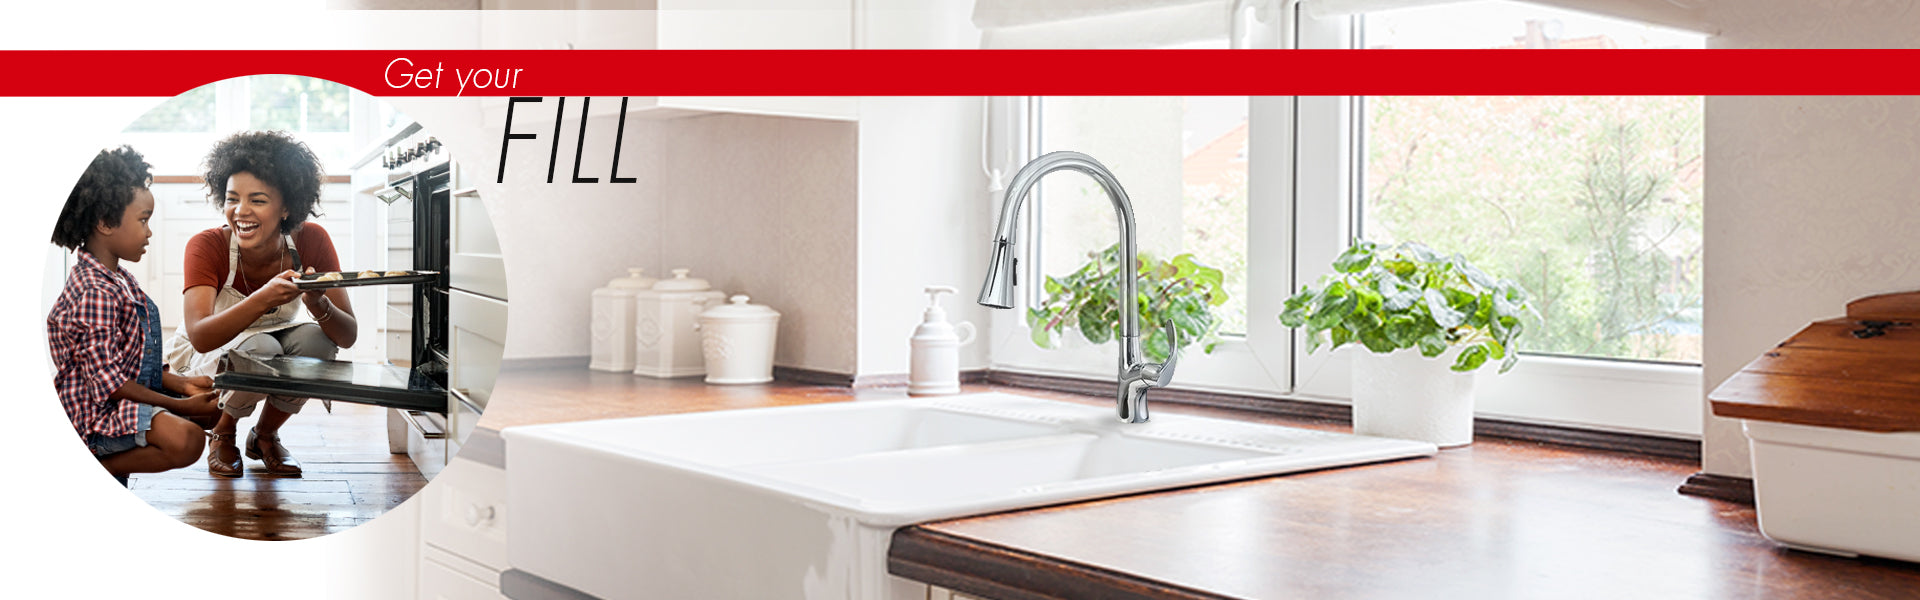 Luxart Kitchen Faucet banner: Get Your Fill